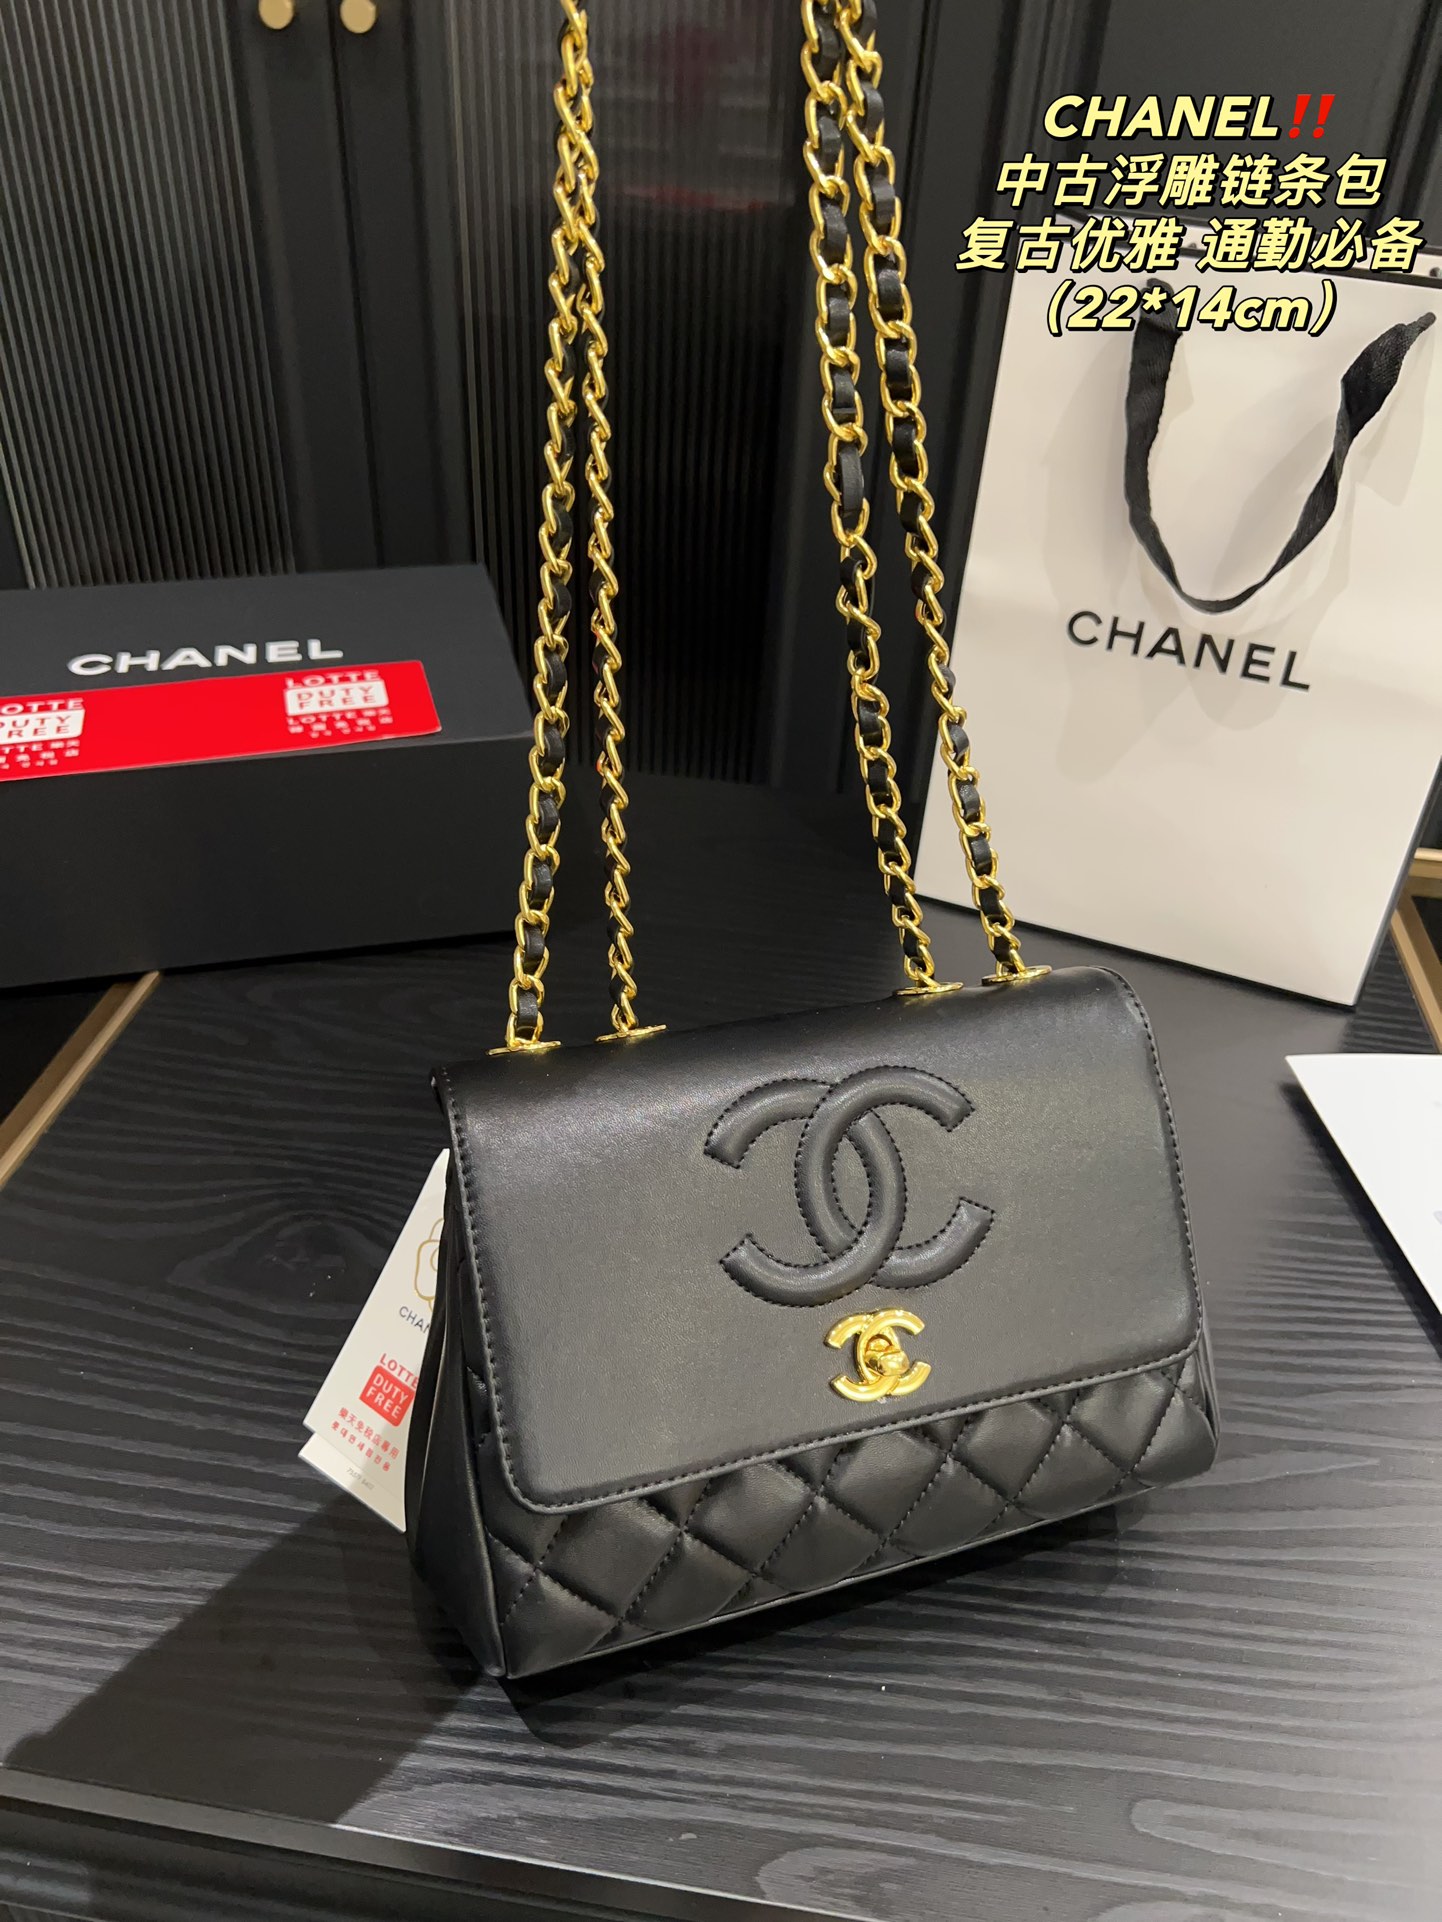 Chanel Crossbody & Shoulder Bags Fall/Winter Collection Vintage Chains